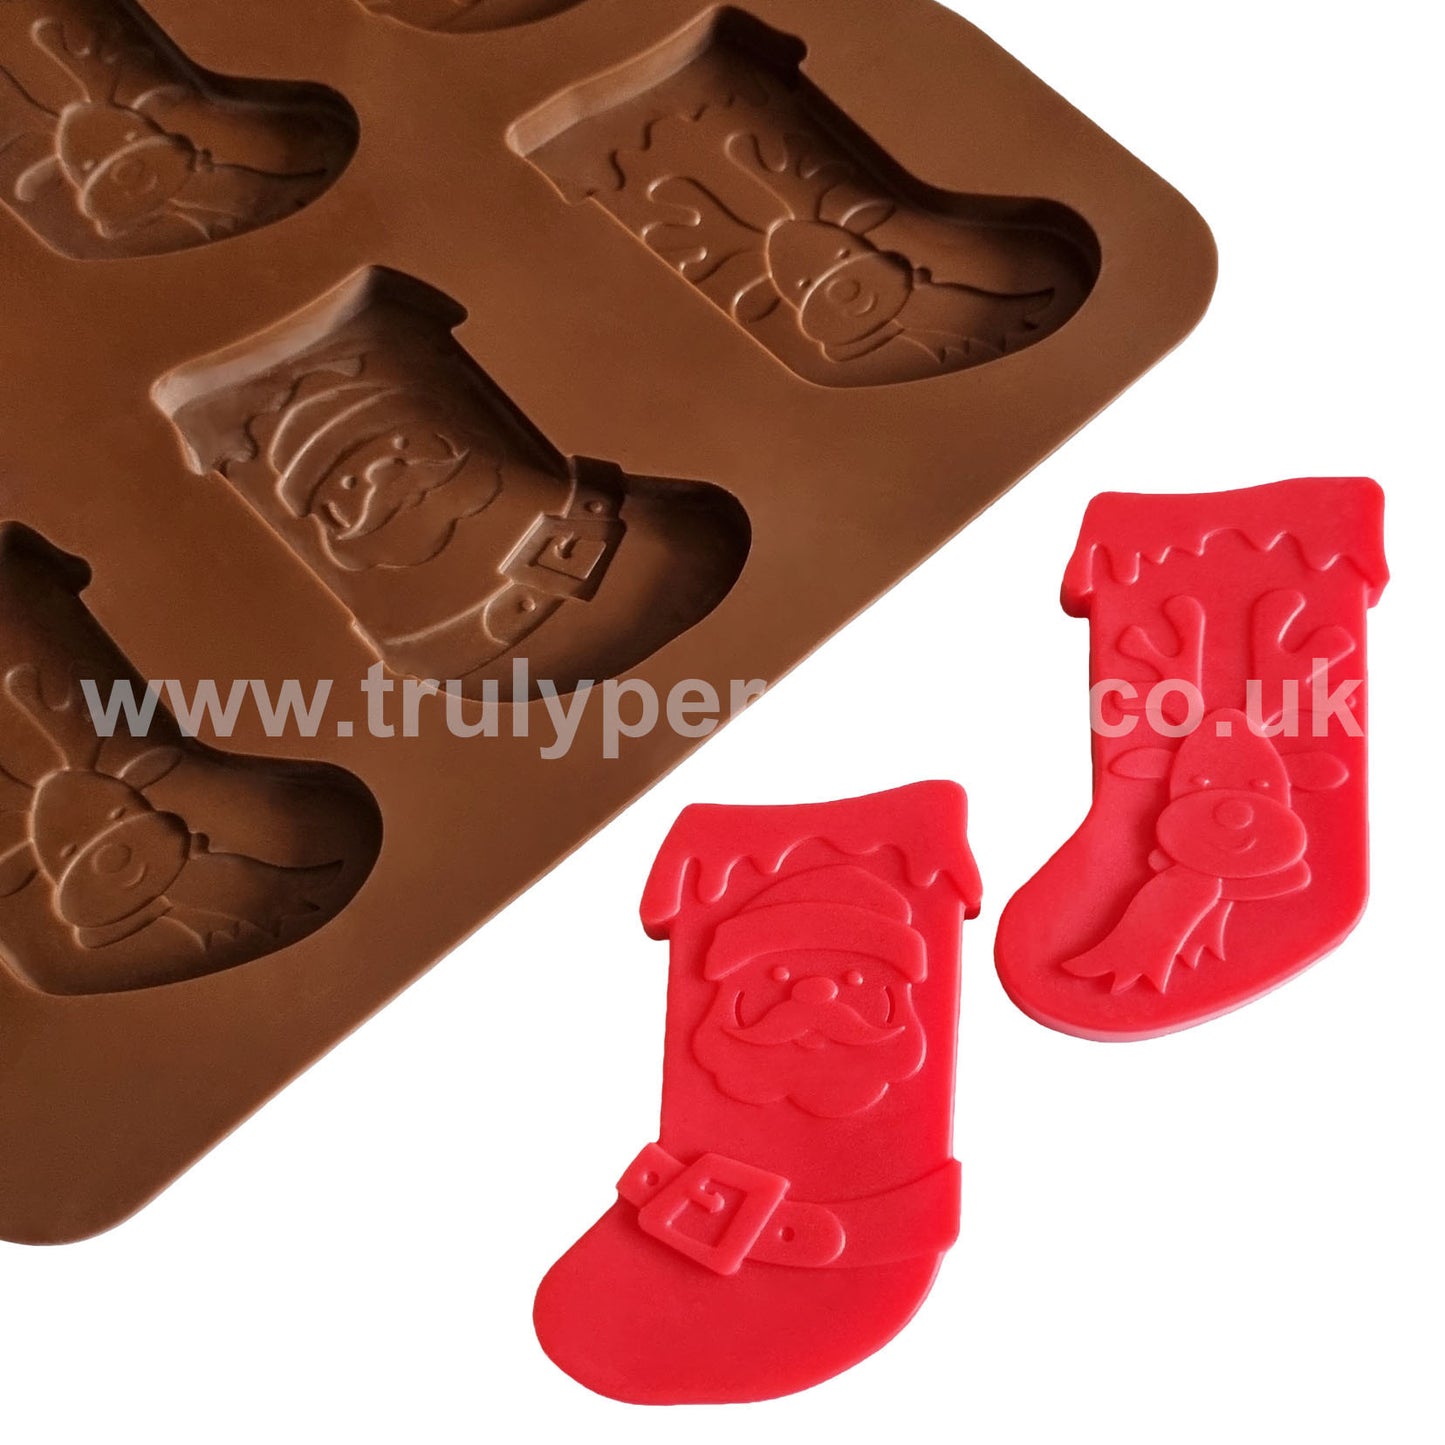 Christmas Stocking Silicone Mould | Wax Melts | Truly Personal Ltd